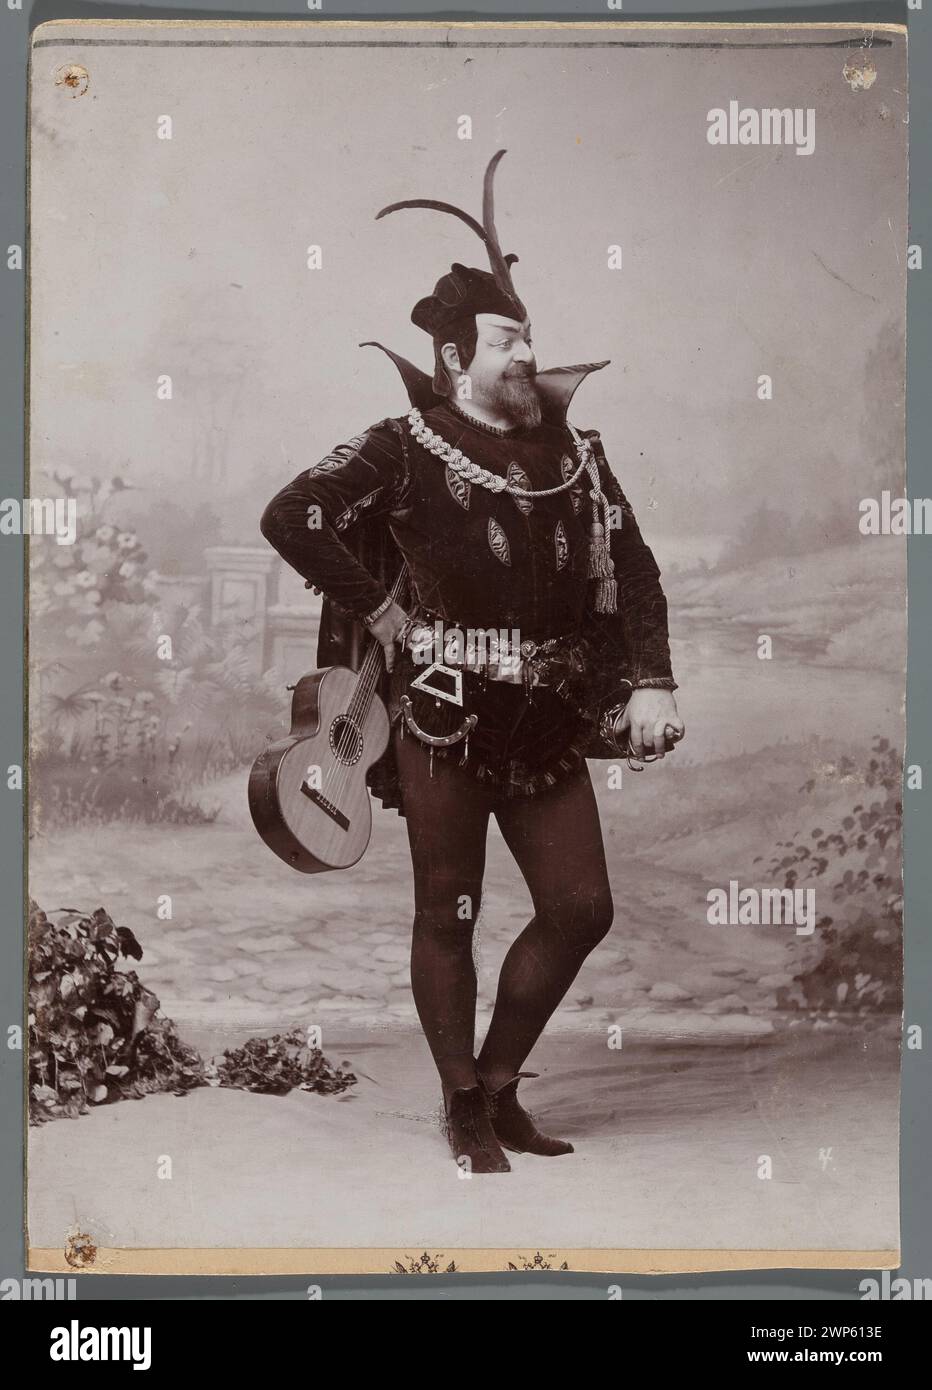 Portrait of Edward Reszke (1853-1917), Piwak, in a stage costume, in the role of MEFIST at the 'Faust' opera of Charles Gount at the Grand Theater in Warsaw; Mieczkowski, Jan (Warsaw; photographic Zak 1893 (1893-00-00-1893-00-00);Gounod, Charles (1818-1893). Faust, Mephisto (lit.), Rajchman, Aleksander (1855-1915)-collection, Reszke, Edward (1853-1917), Reszke, Edward (1853-1917)-iconography, Grand Theater (Warsaw), guitars, musical instruments, musical instruments, Theater costumes, opera (artist), portraits, men's portraits, theater (artist), singers Stock Photo